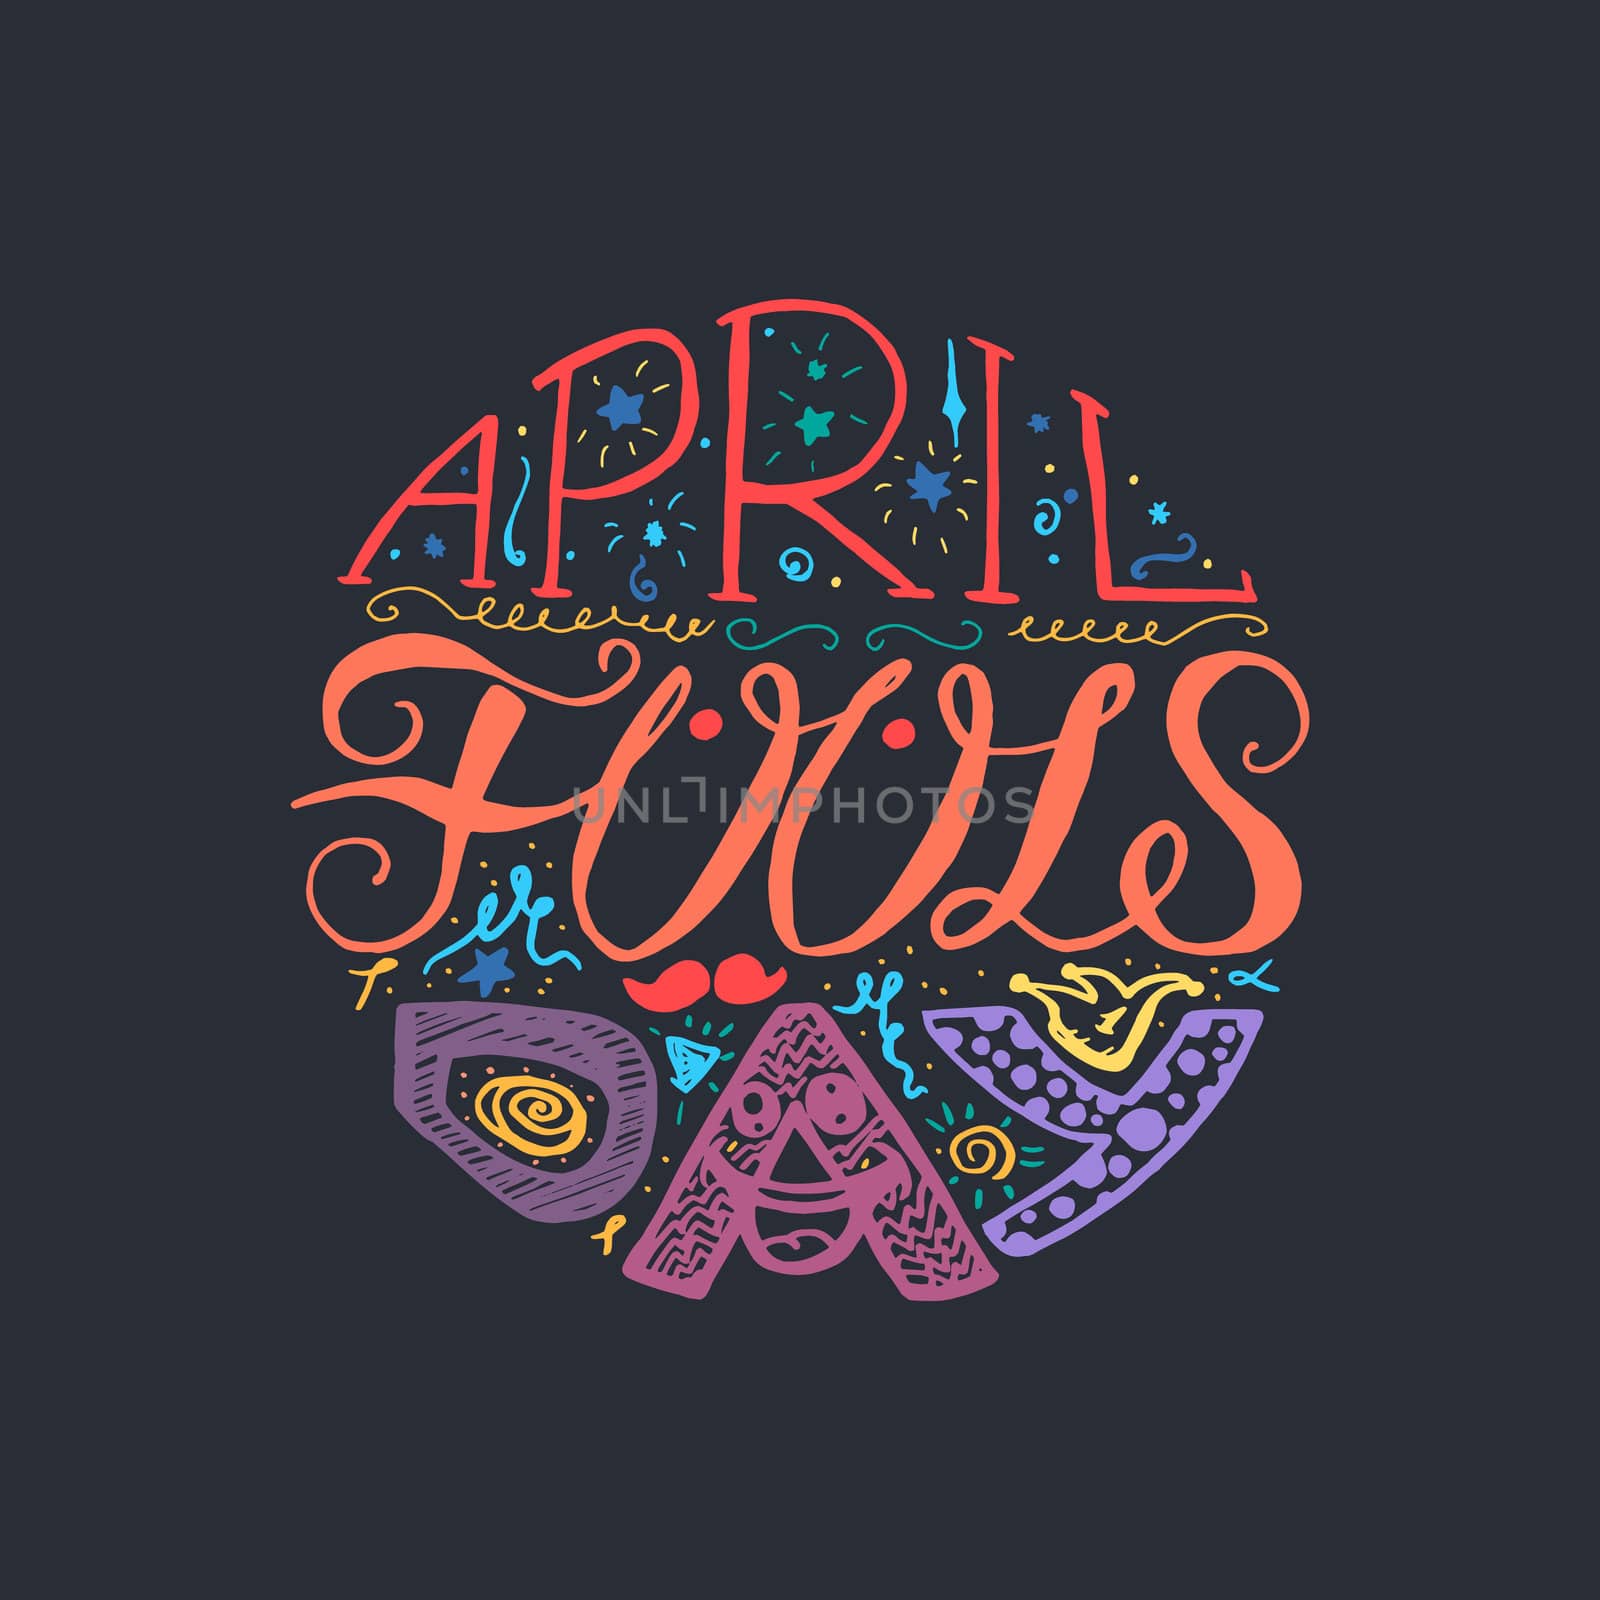 April Fools Day Hand Drawn Lettering with smile, jester hat and mustache for print, poster, web, greeting card, illustrations. Vector